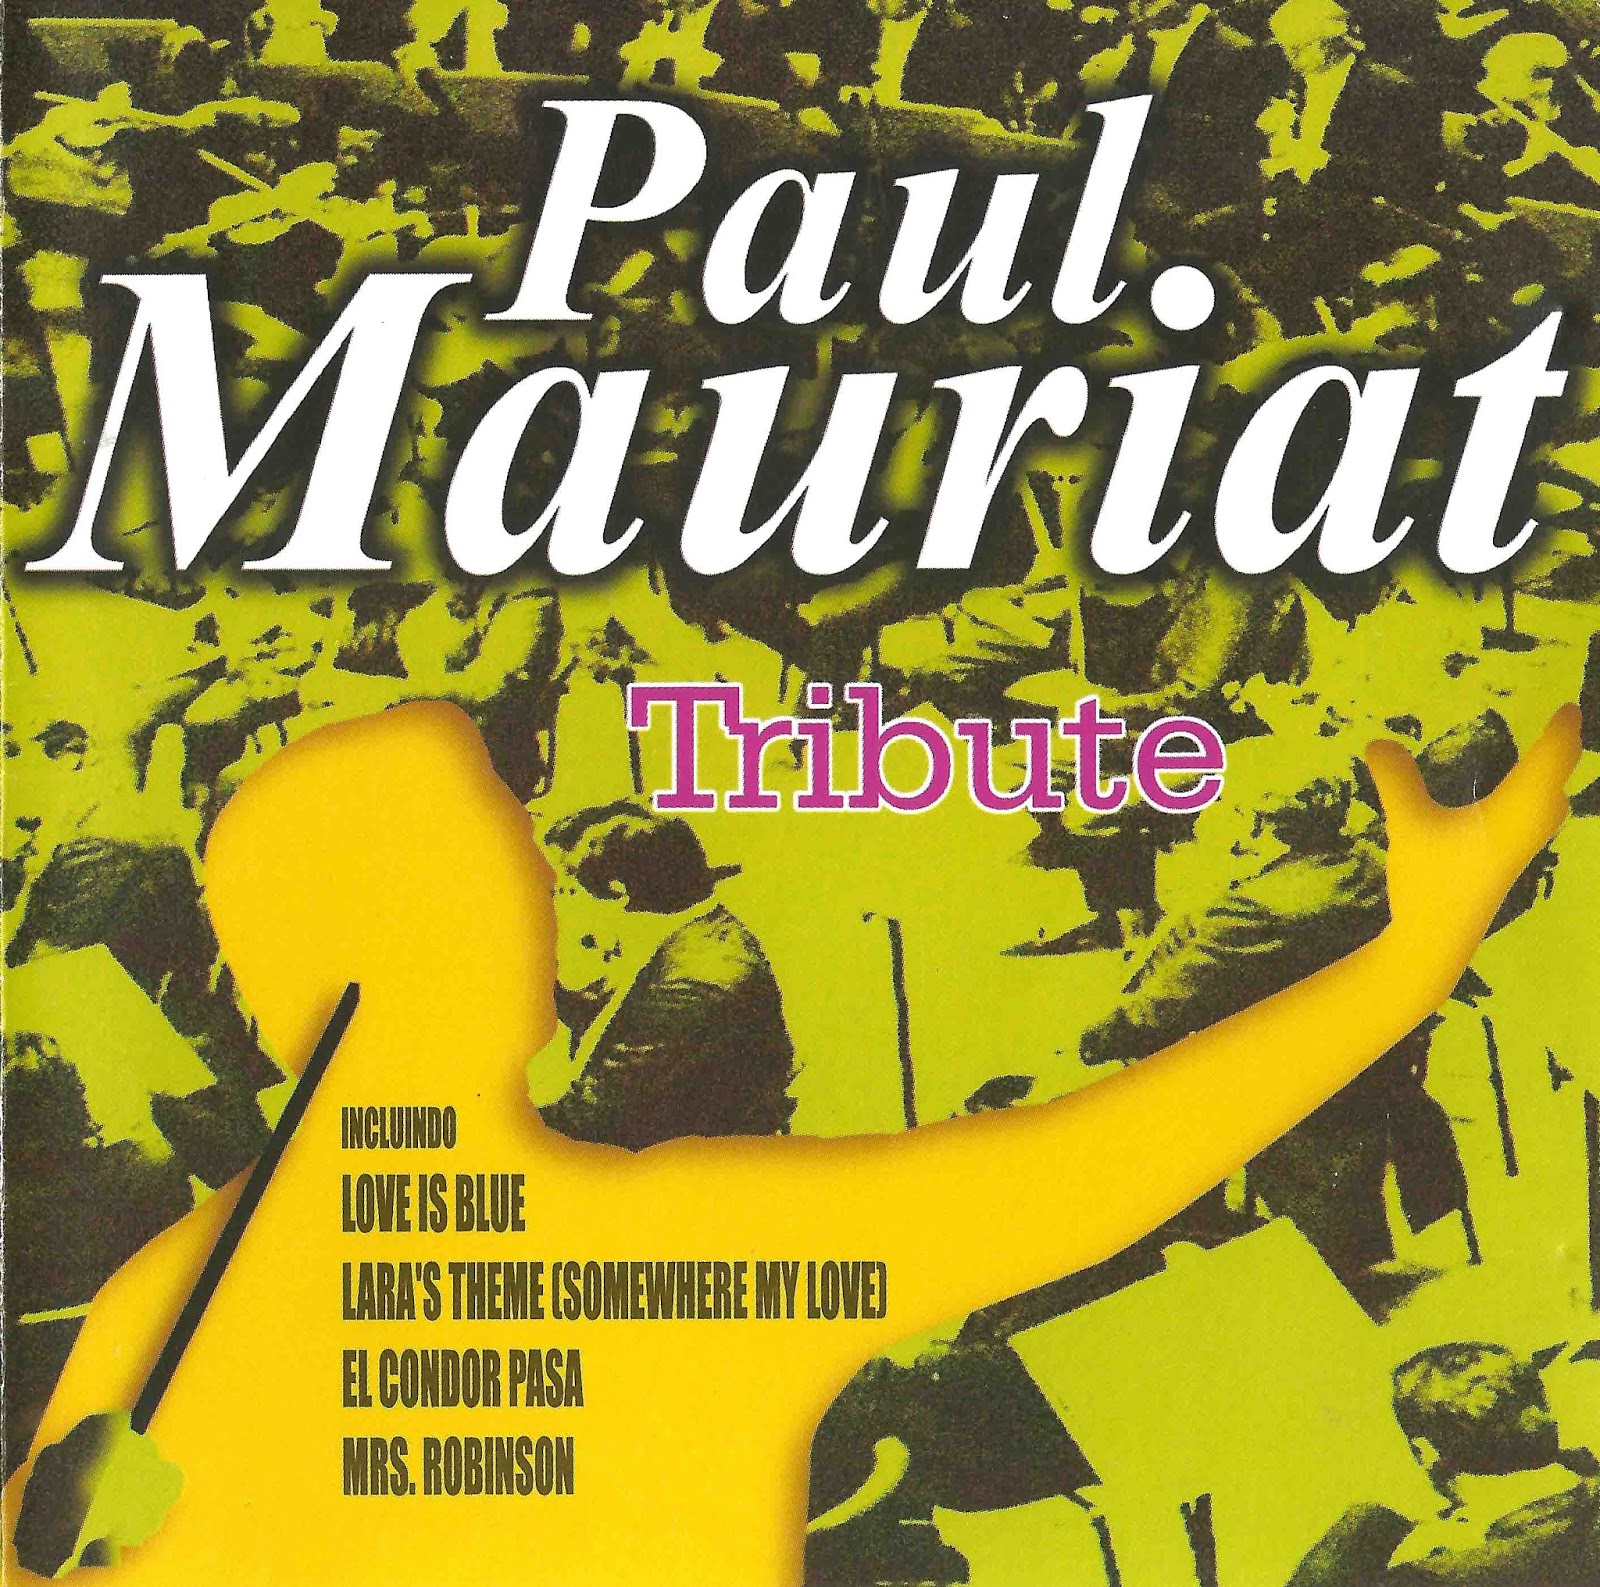 Paul mauriat mp3. Paul Mauriat Orchestra.